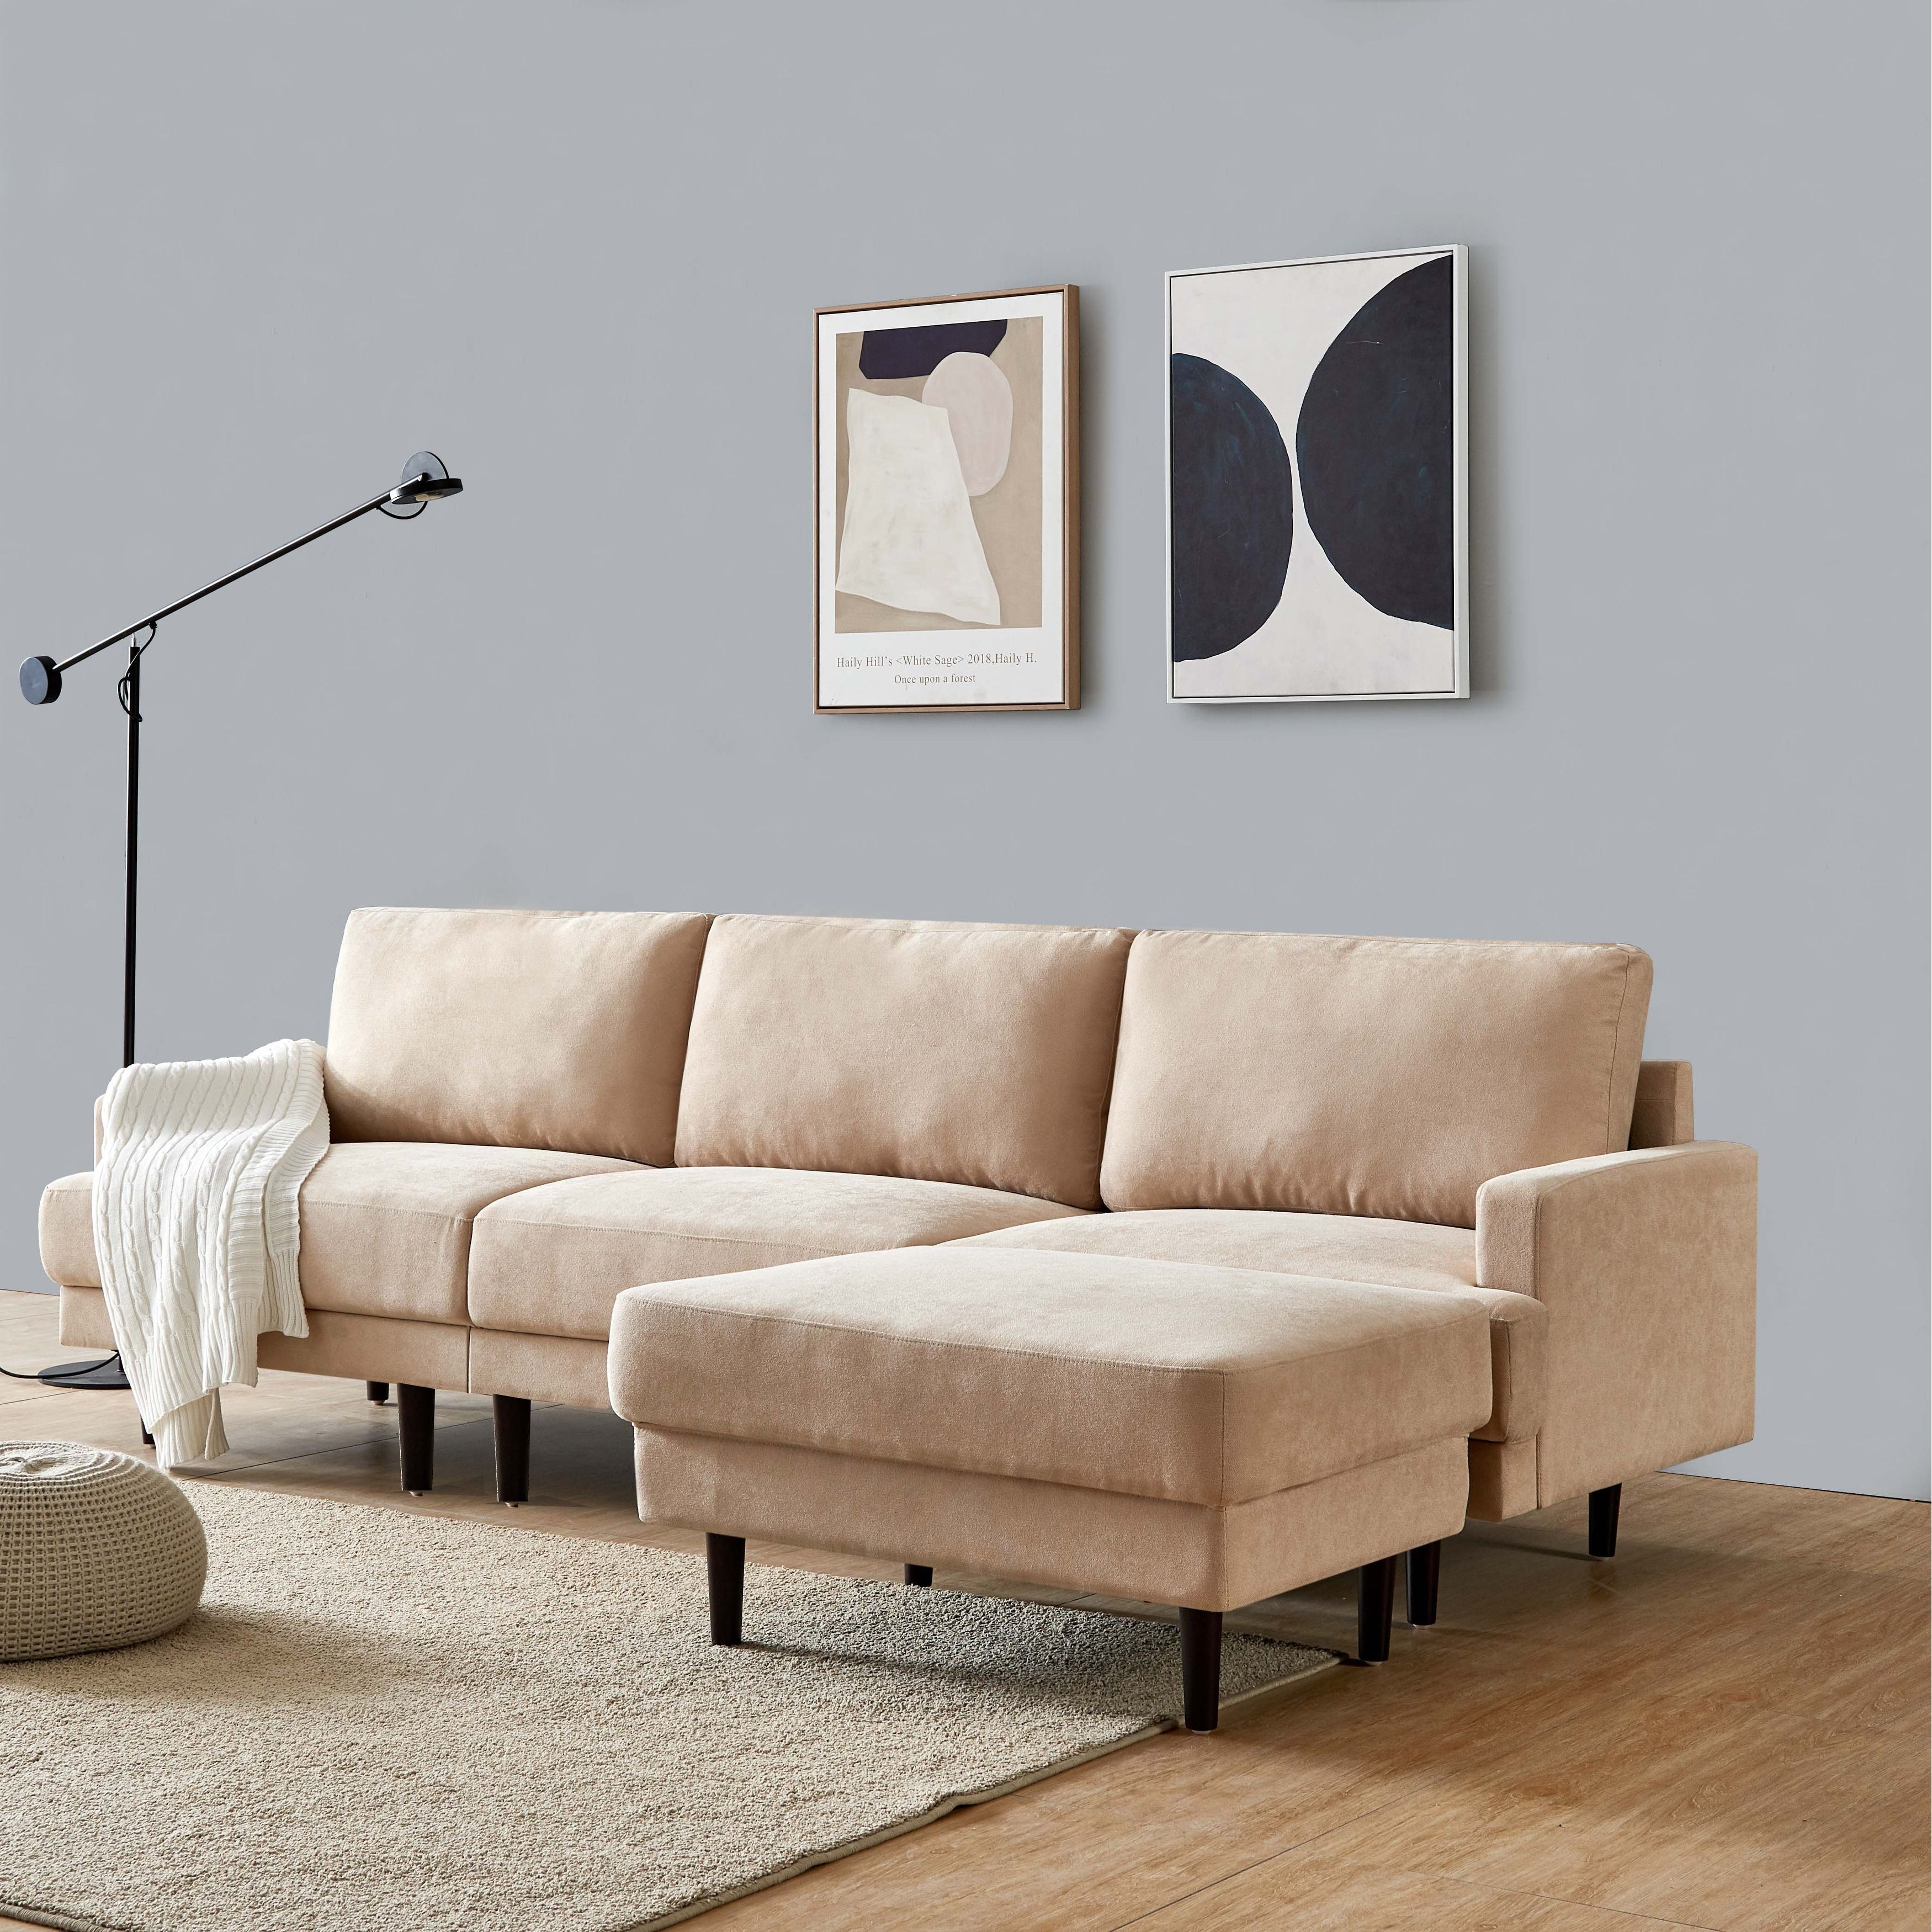 Modern Fabric Sofa L Shape, 3 Seater With Ottoman Material Polyester Fabric,solid  Wood Legs,high Density Foam – – 36692212 Intended For Office Modern Fabric Sofas (View 18 of 20)